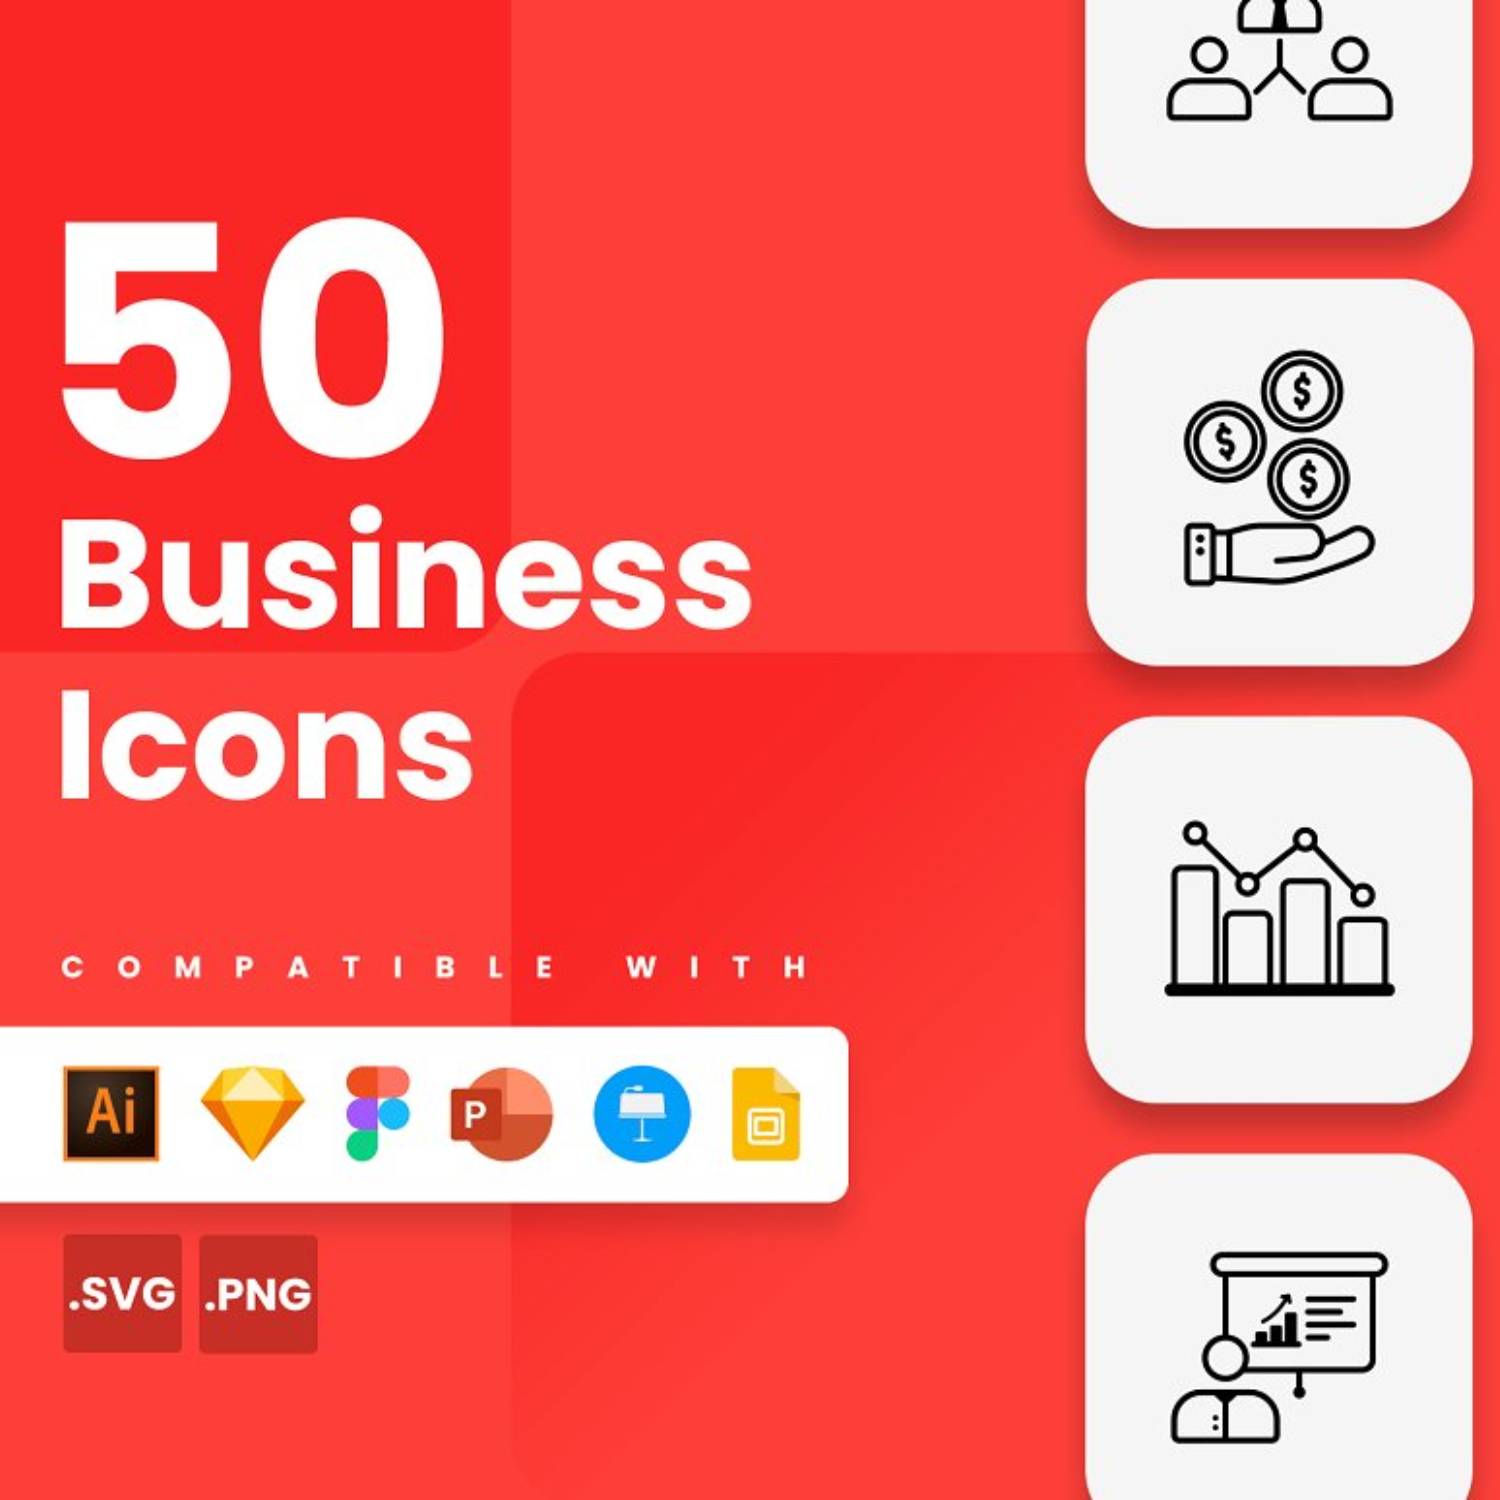 Business Icons Main Cover.